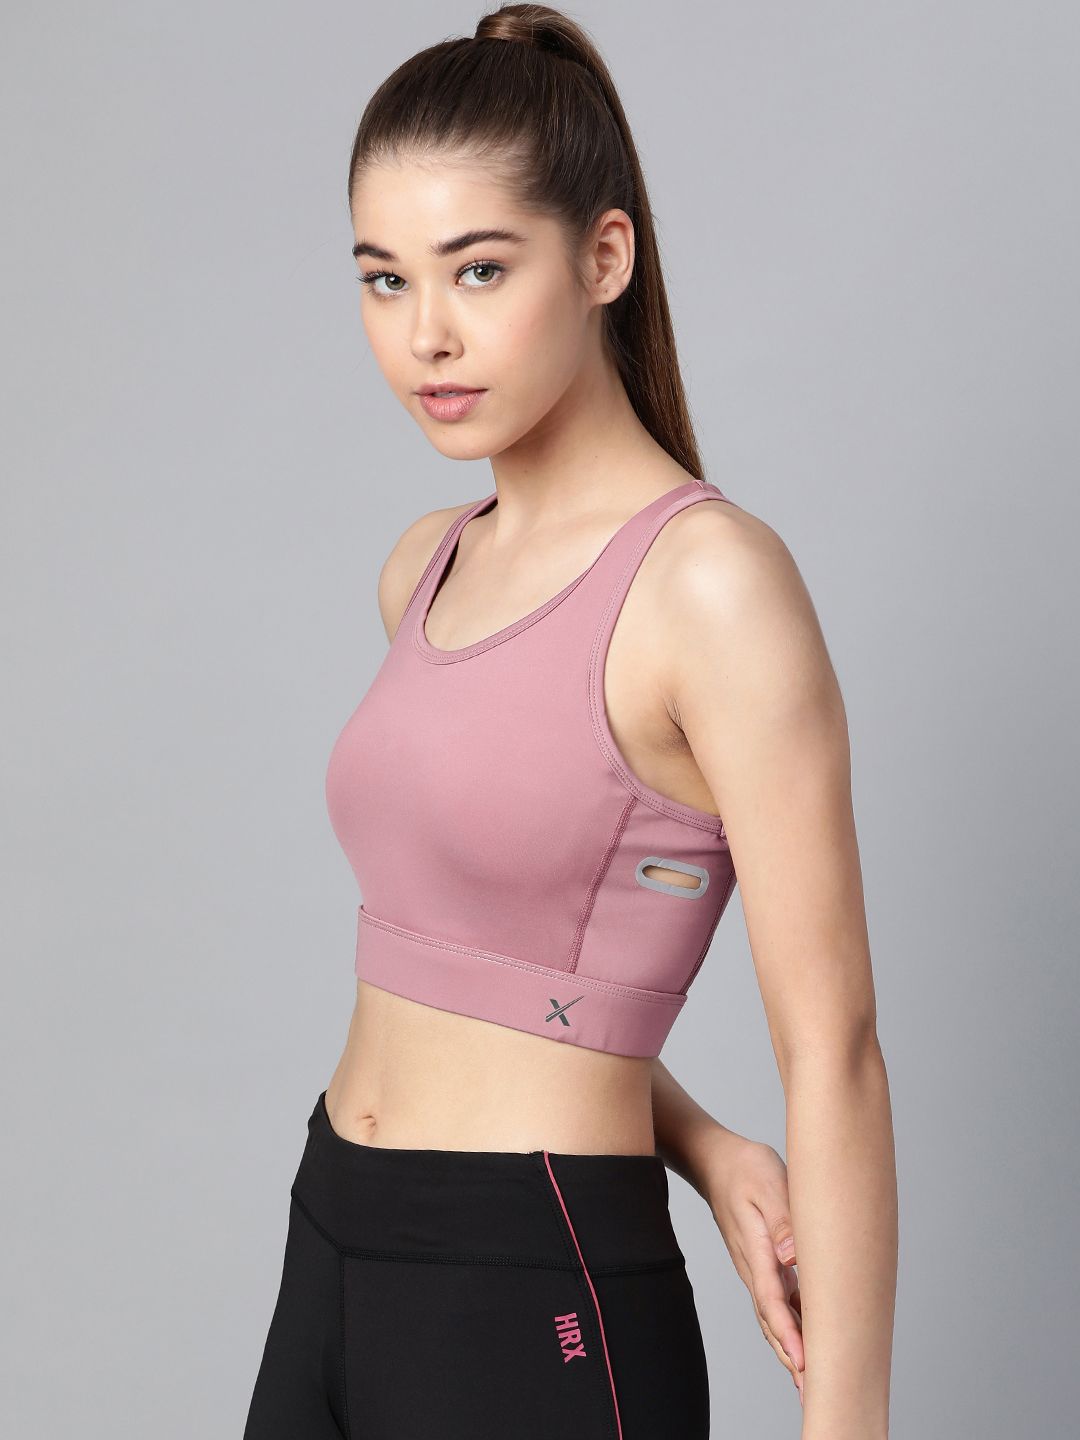 HRX on X: Unleash your inner athlete and gear up with the HRX Women's  Sports Bra collection 👊 Now available at incredible discounts during the @ myntra End Of Reason Sale. Start shopping